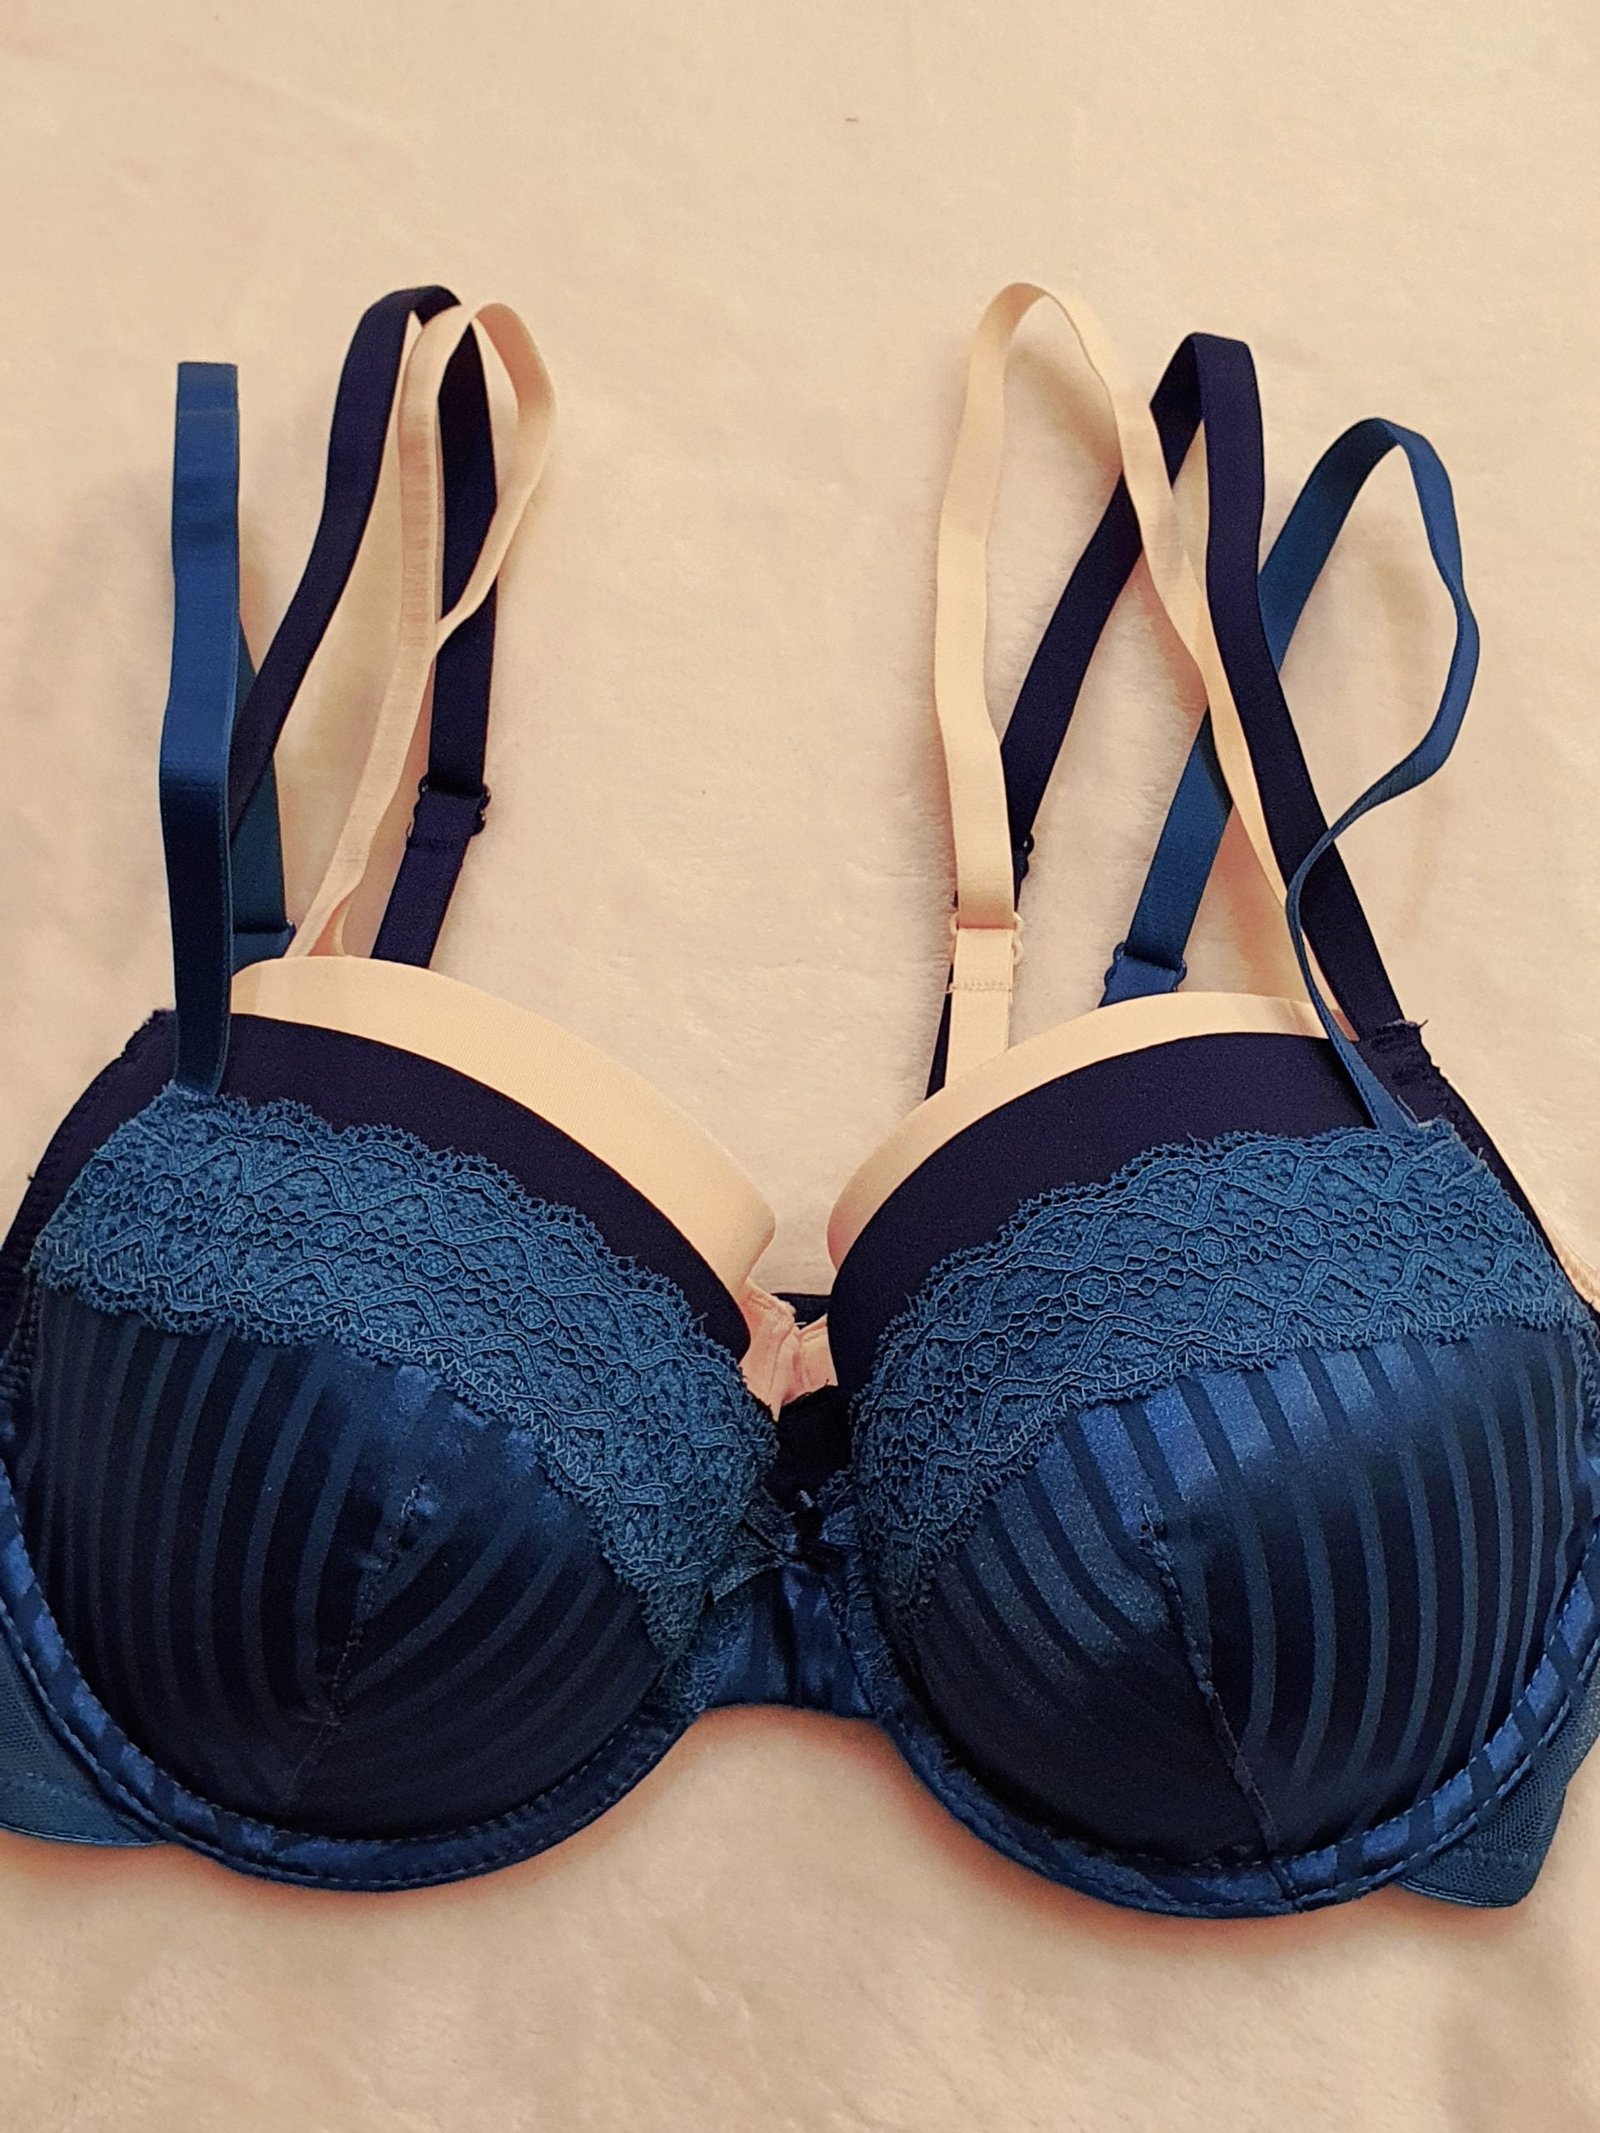 What is a t-shirt bra? - Quora